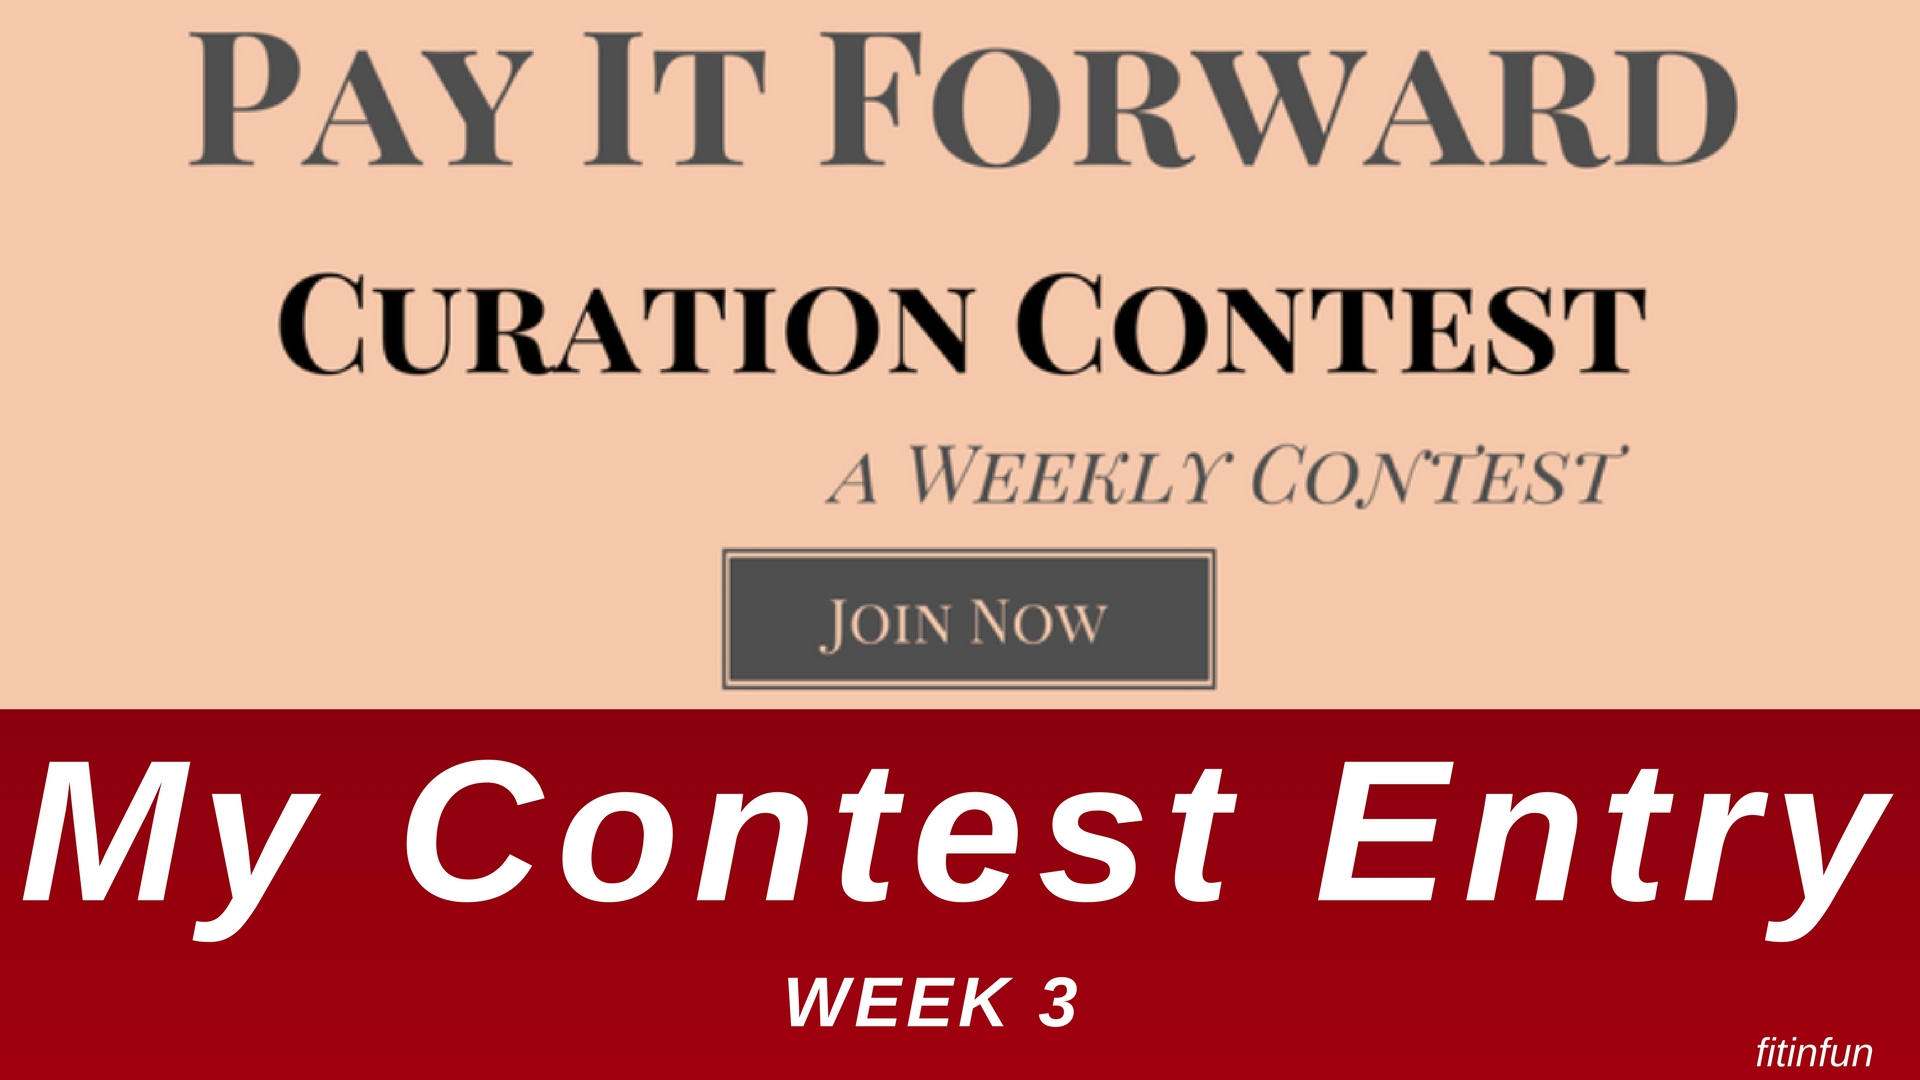 Pay It Forward Contest week 3 Entry by fitinfun.jpg